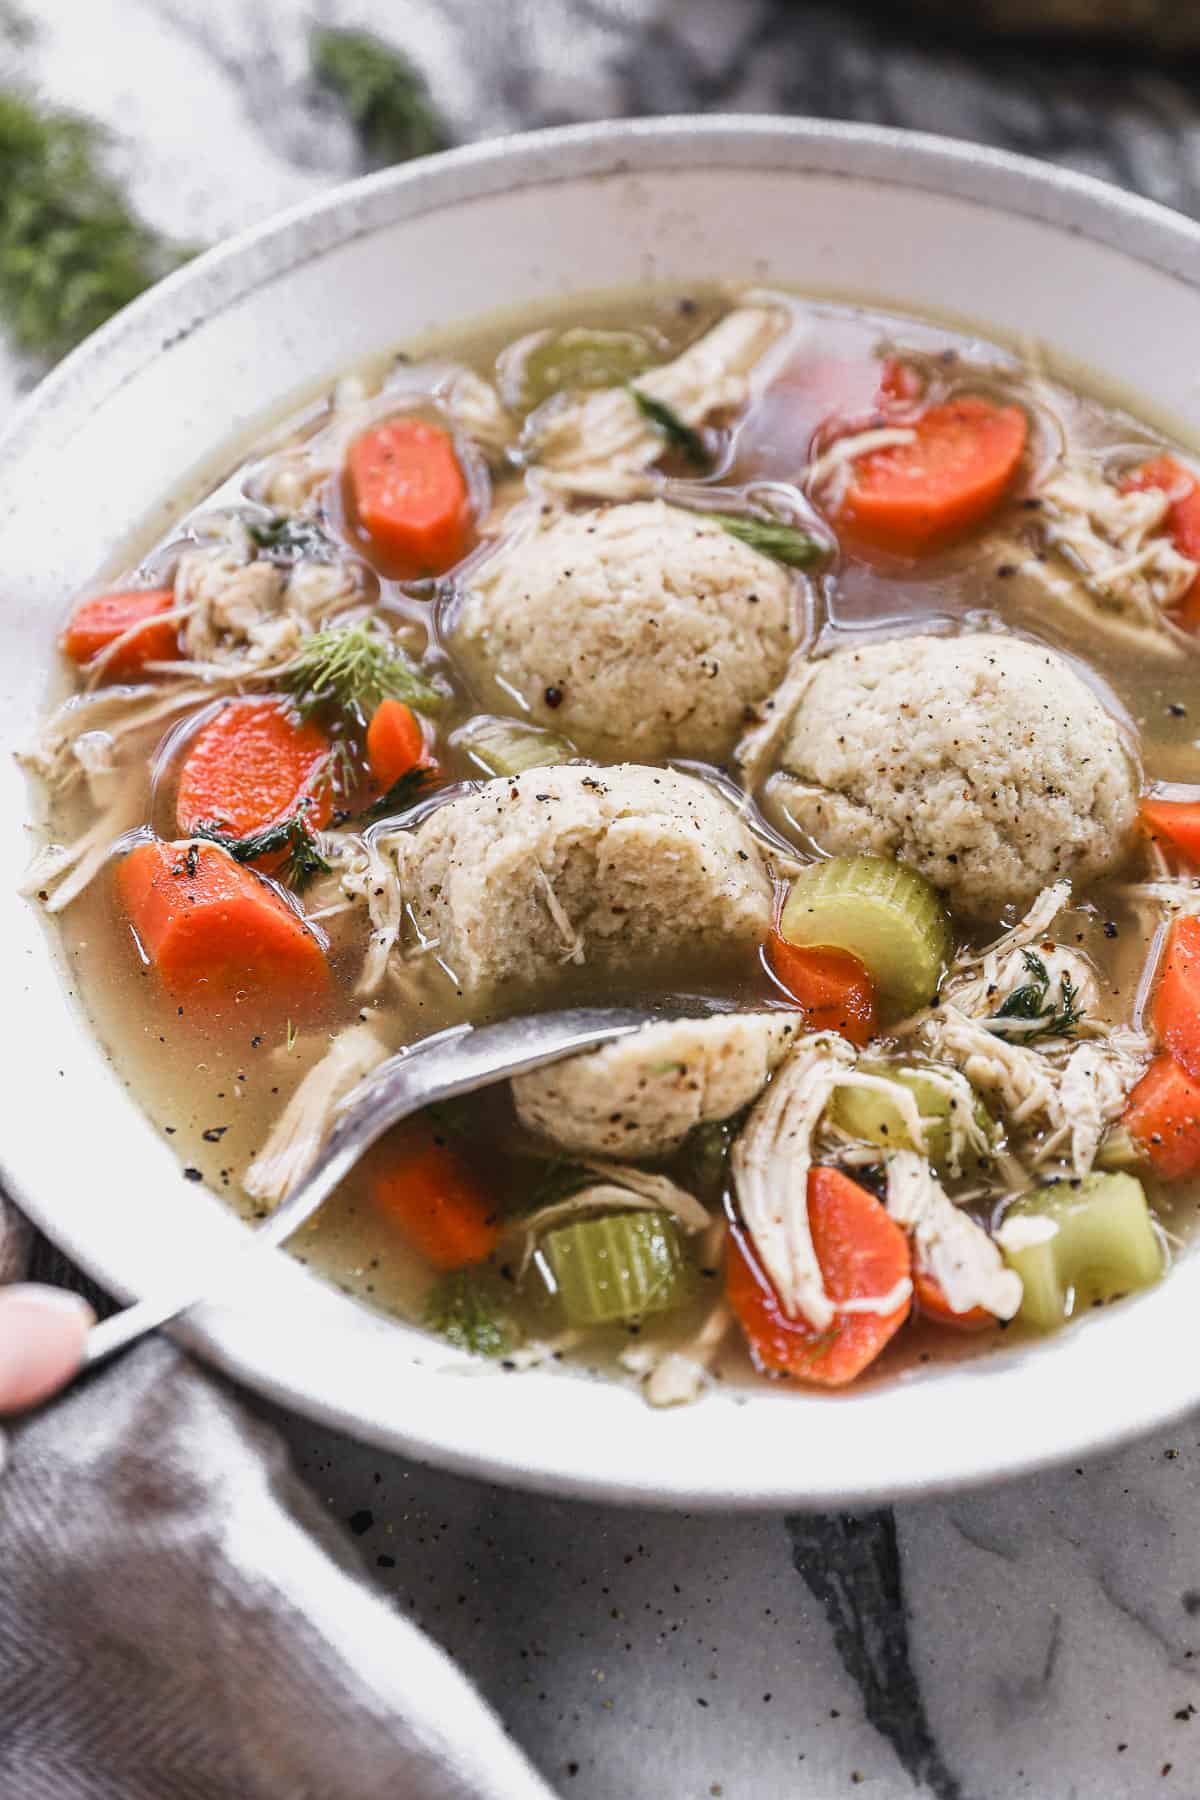 The best Matzo Ball Soup recipe served in a white bowl with a spoon cutting into a homemade matzo ball.